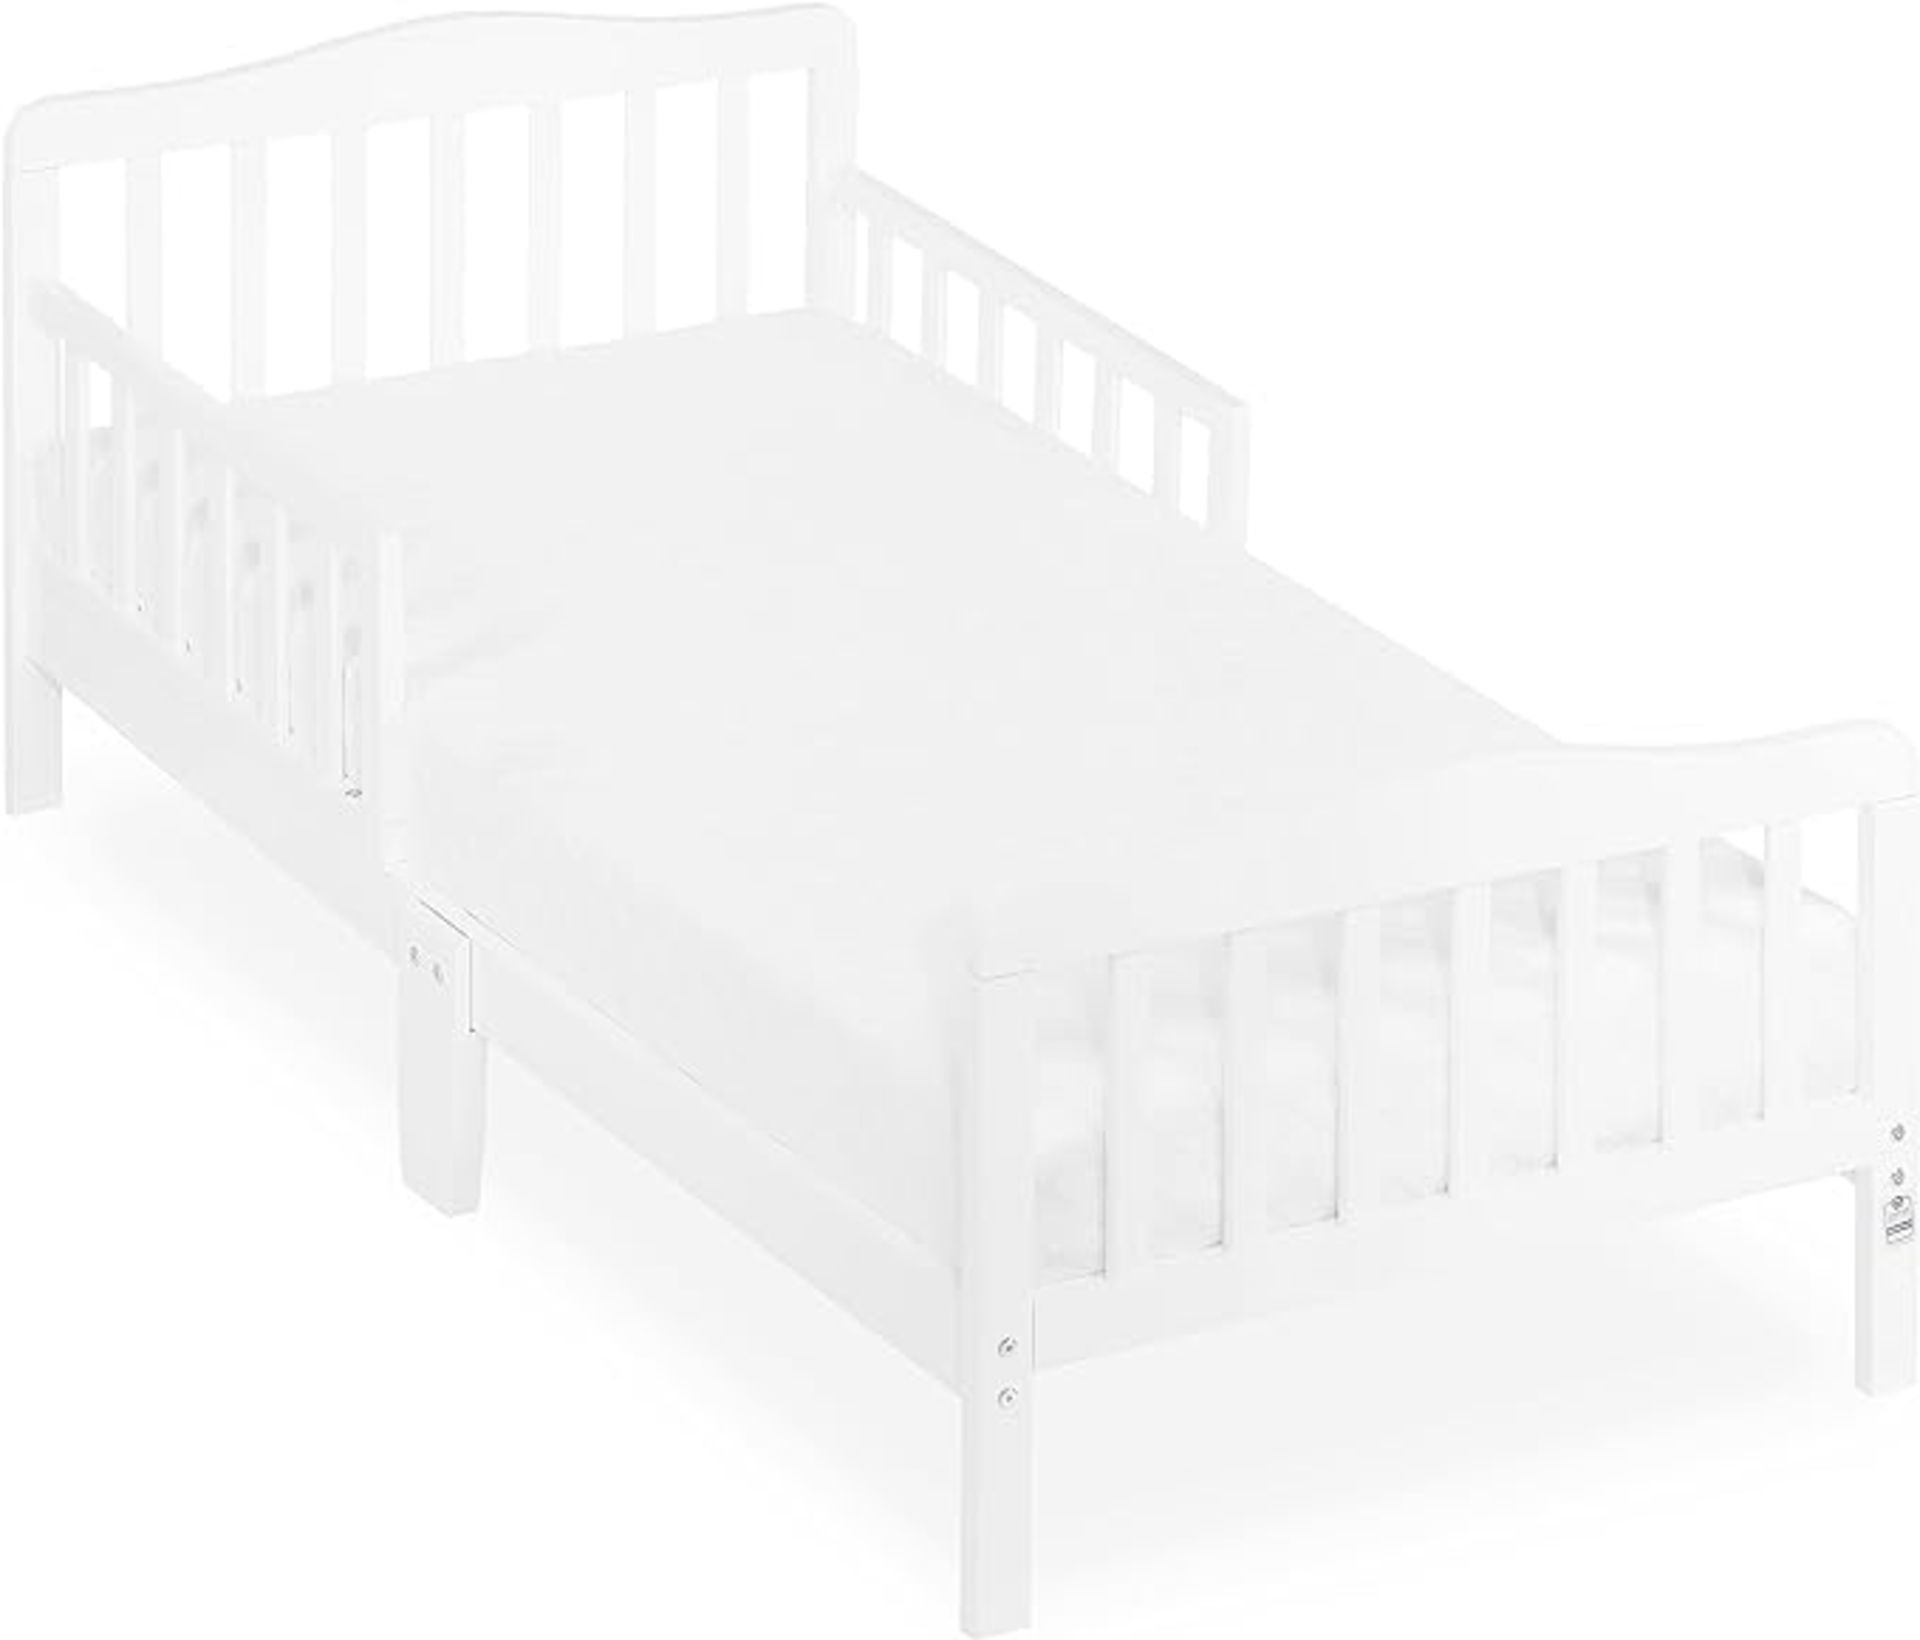 Brand New Dream on Me Classic Toddler Bed. Product dimensionS - 144.8L x 71.1W x 76.2H CM Comes with - Image 3 of 4